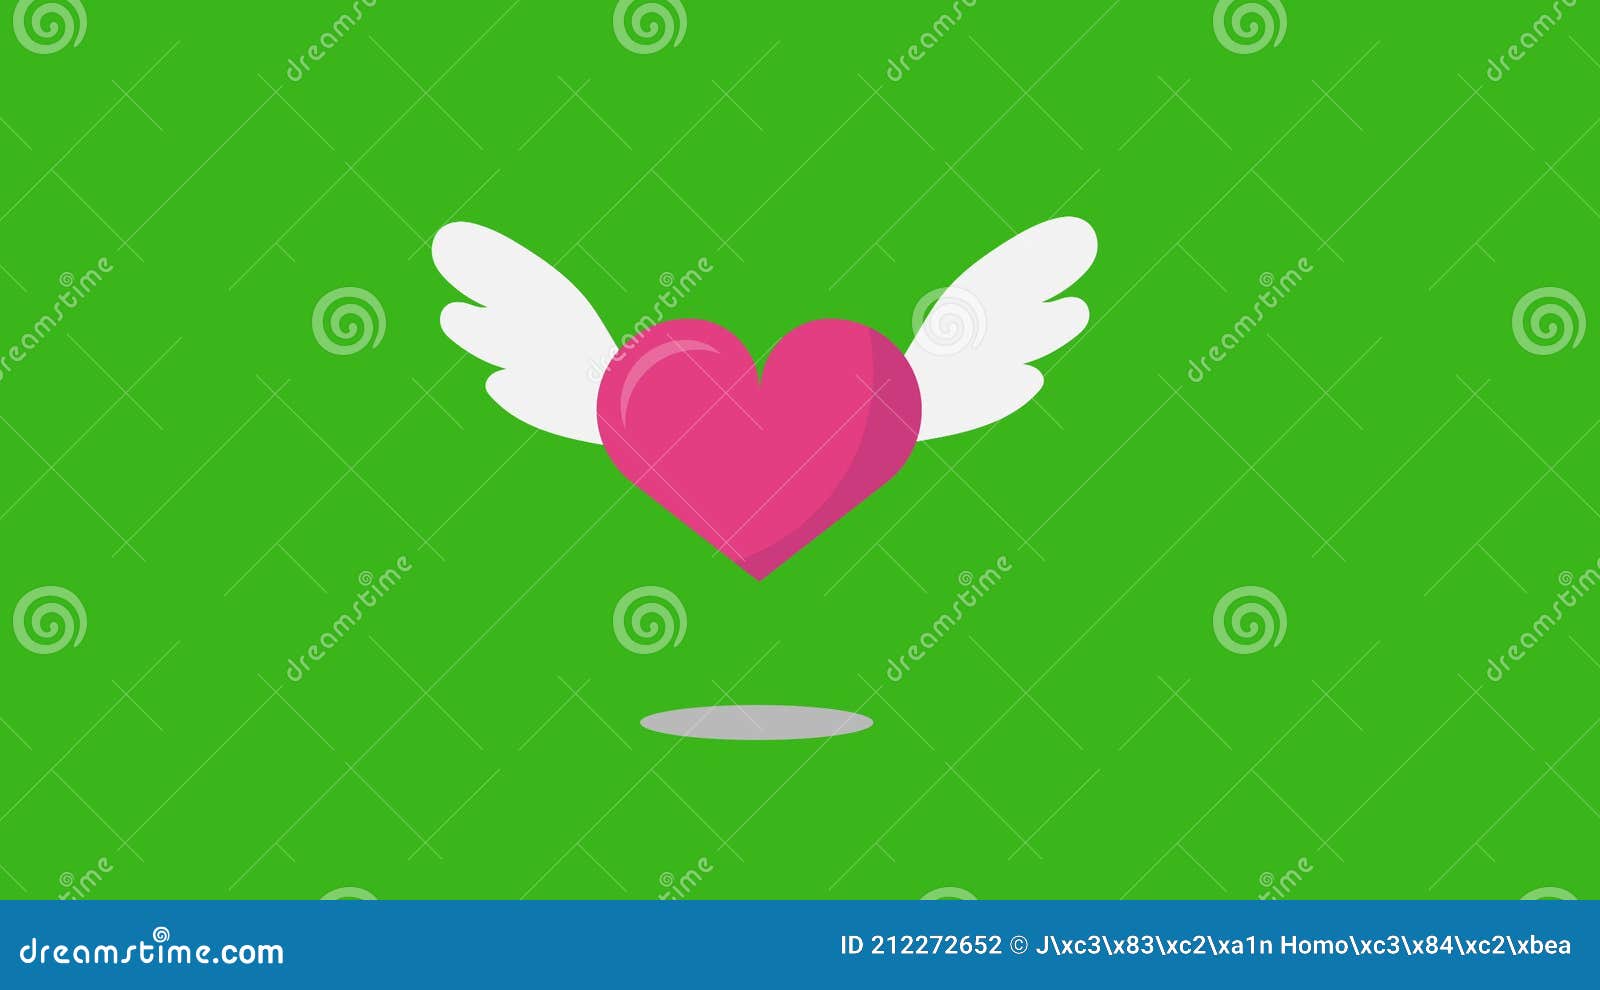 Animated heart flying. stock footage. Video of flow - 212272652